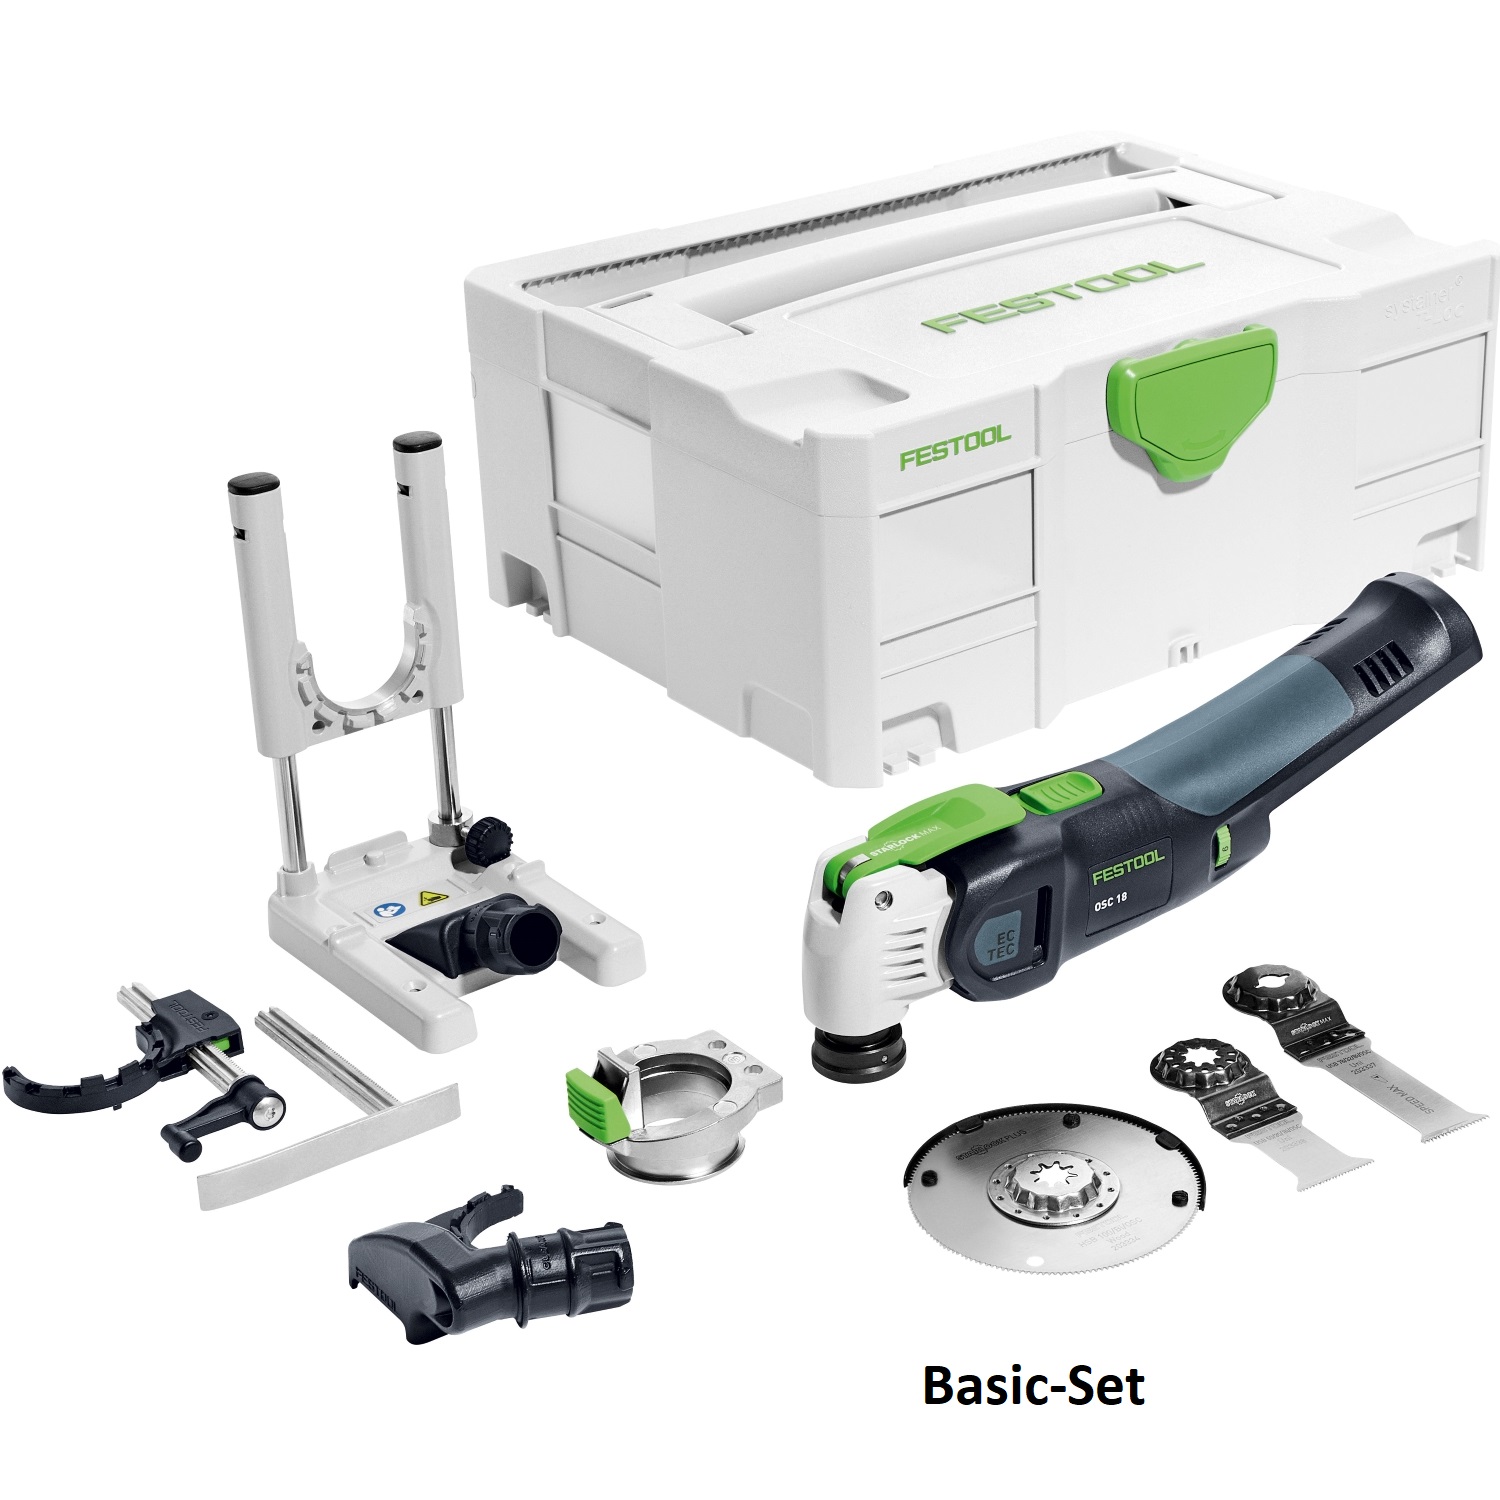 Festool 574850 Vecturo 18V Oscillating Multitool Basic Set with depth stock and additional blades